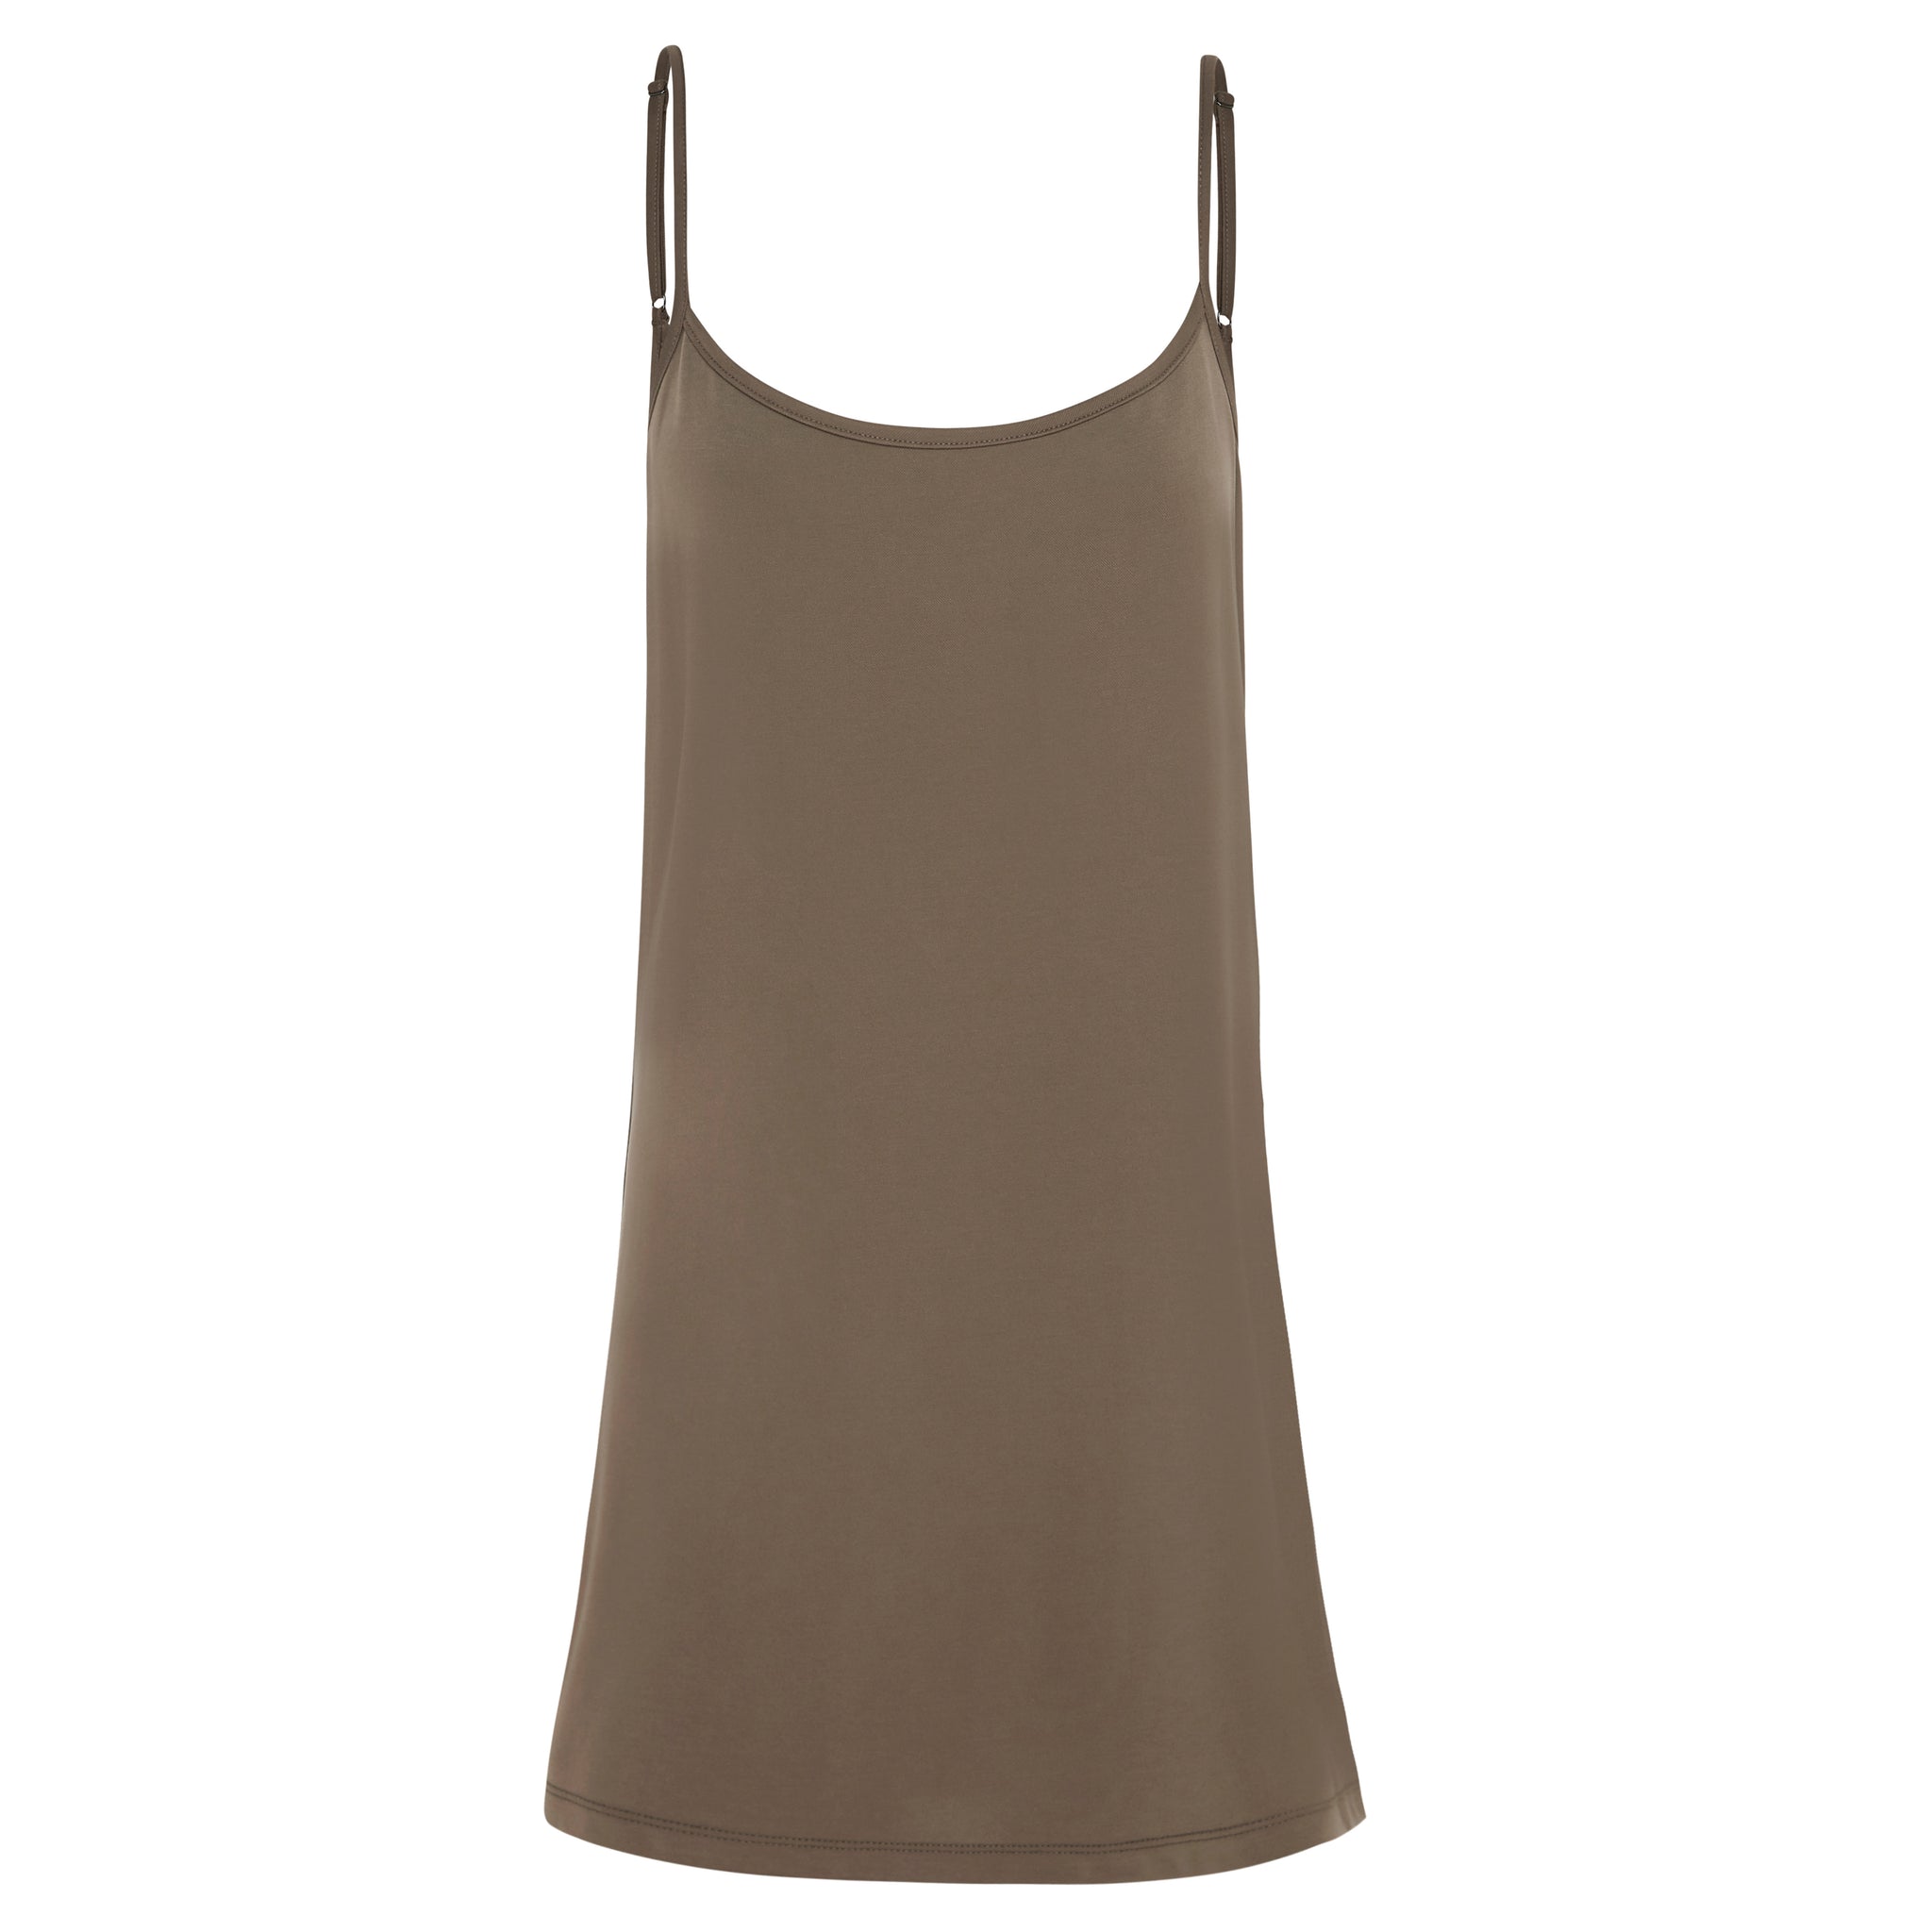 Tyche Longline Cami - Sand Washed Modal Jersey